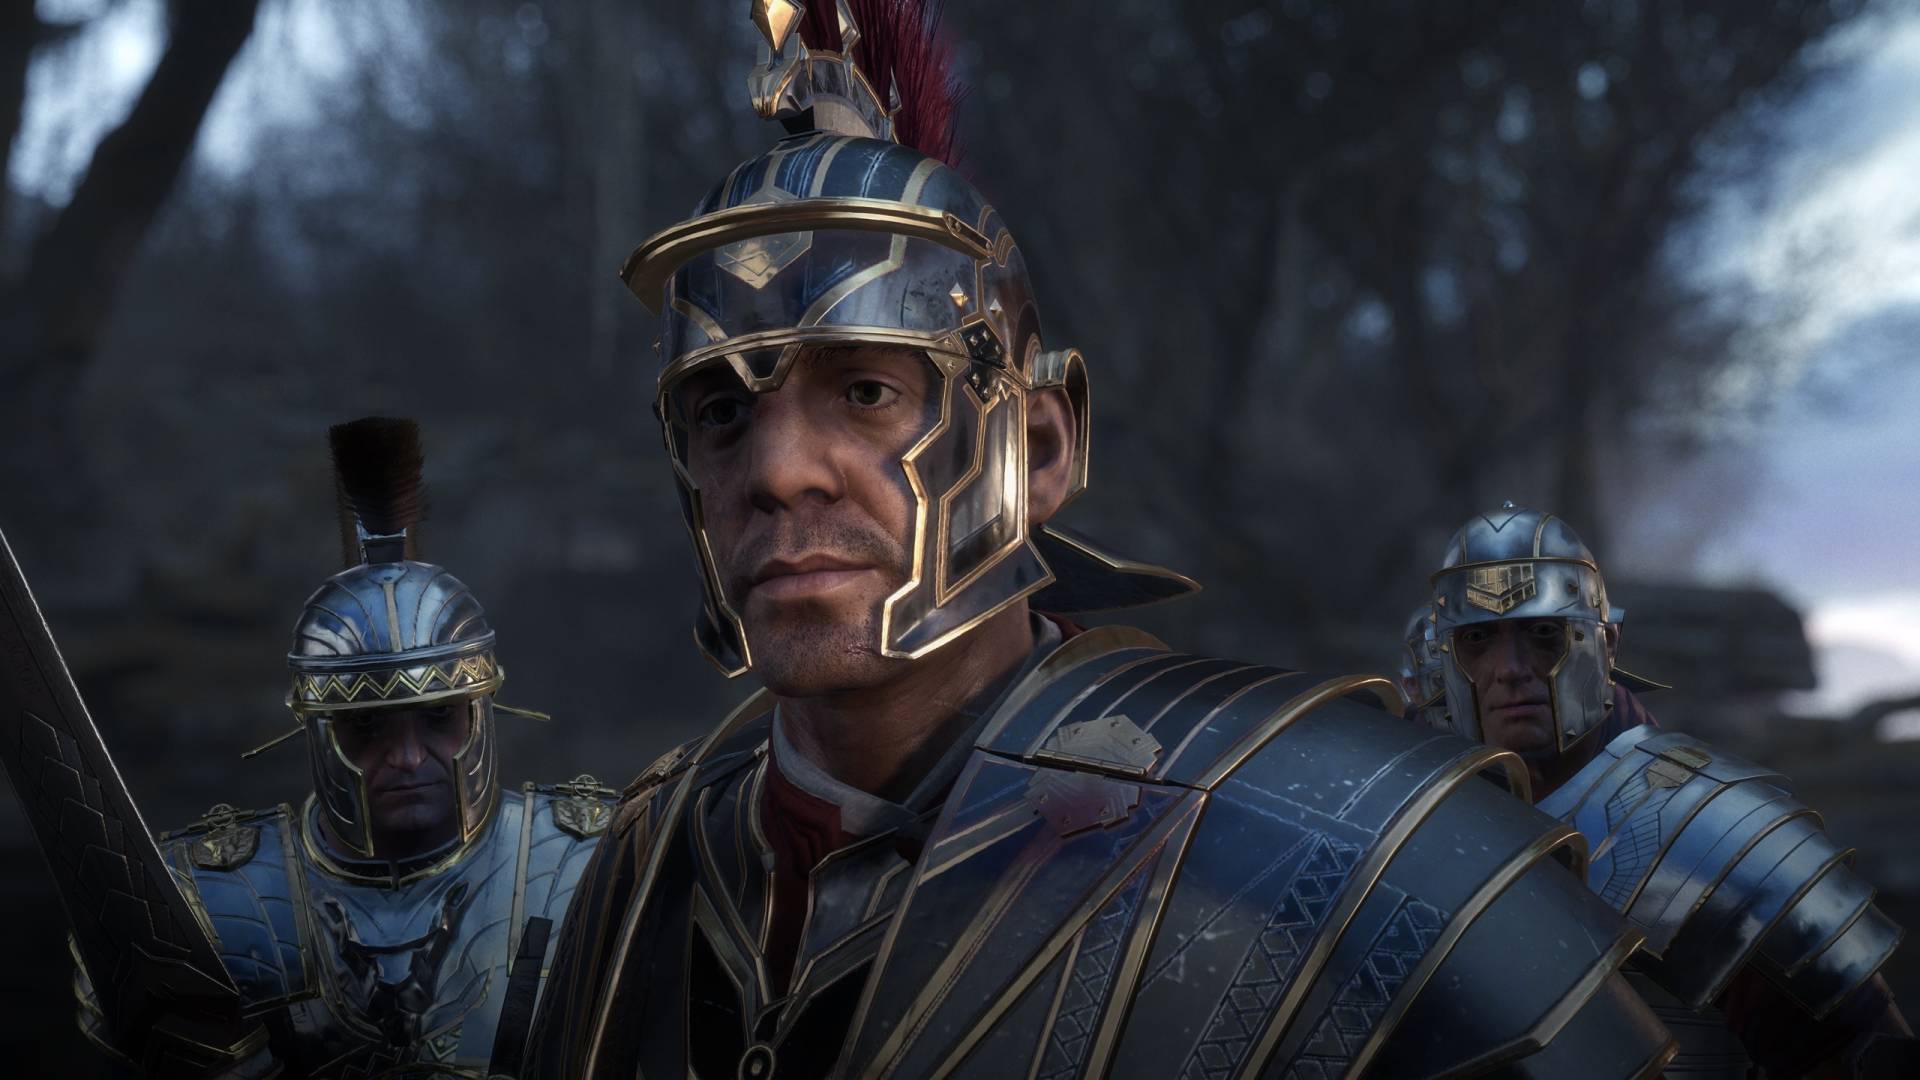 Ryse-Son-of-Rome-Season-Pass-Confirmed-Includes-Multiplayer-Maps-More-396400-2.jpg